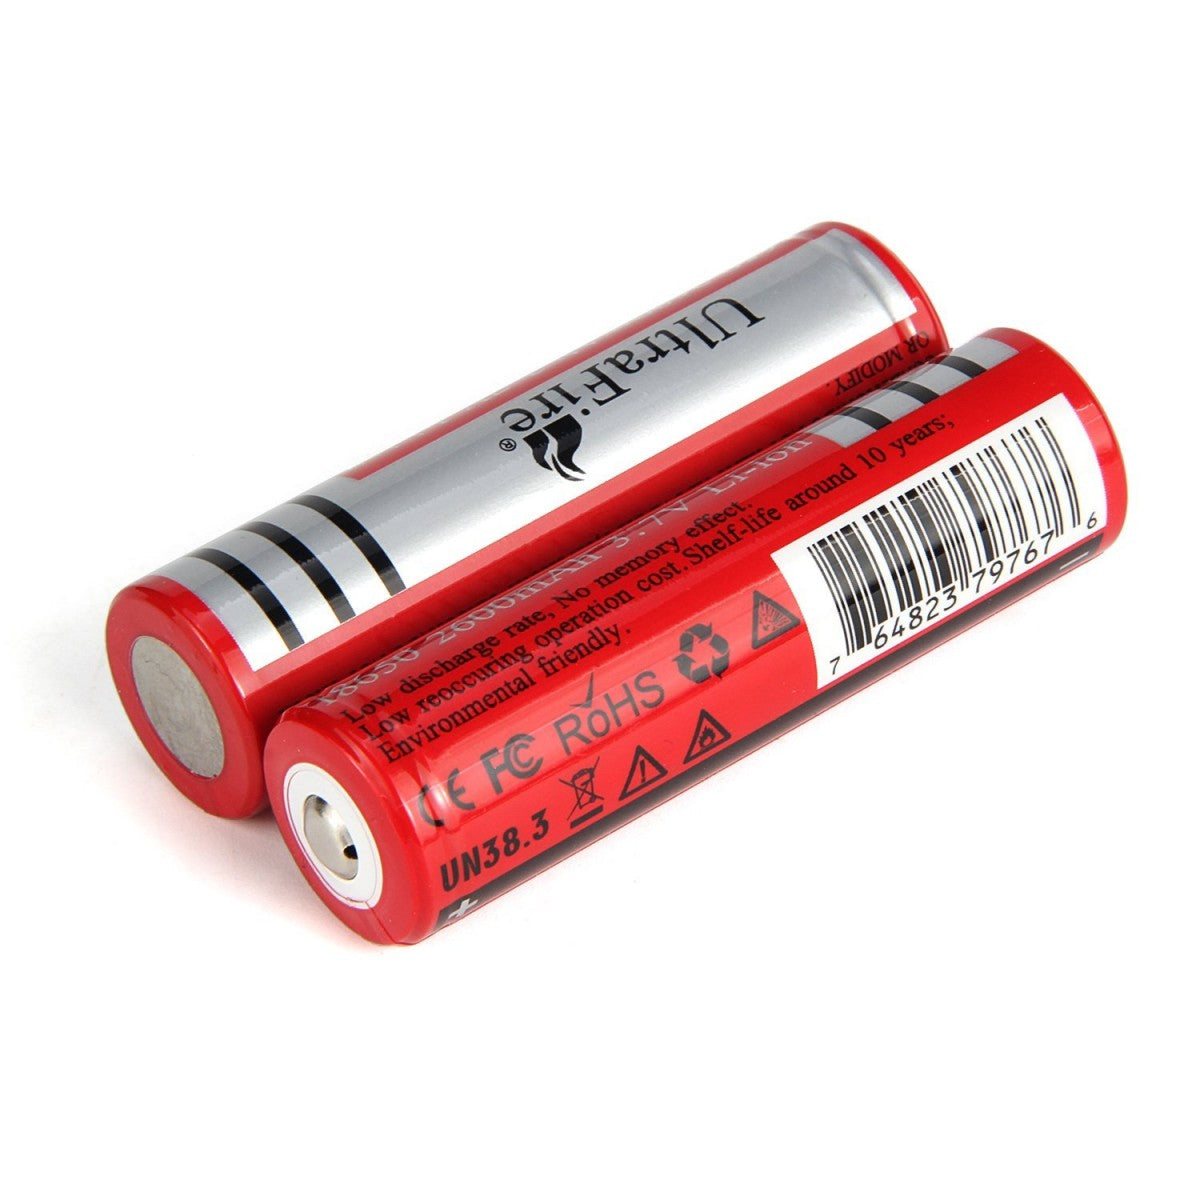 UltraFire 2600mAh 3.7V 18650 Rechargeable BRC Lithium Battery With Protection Board (2PCS)